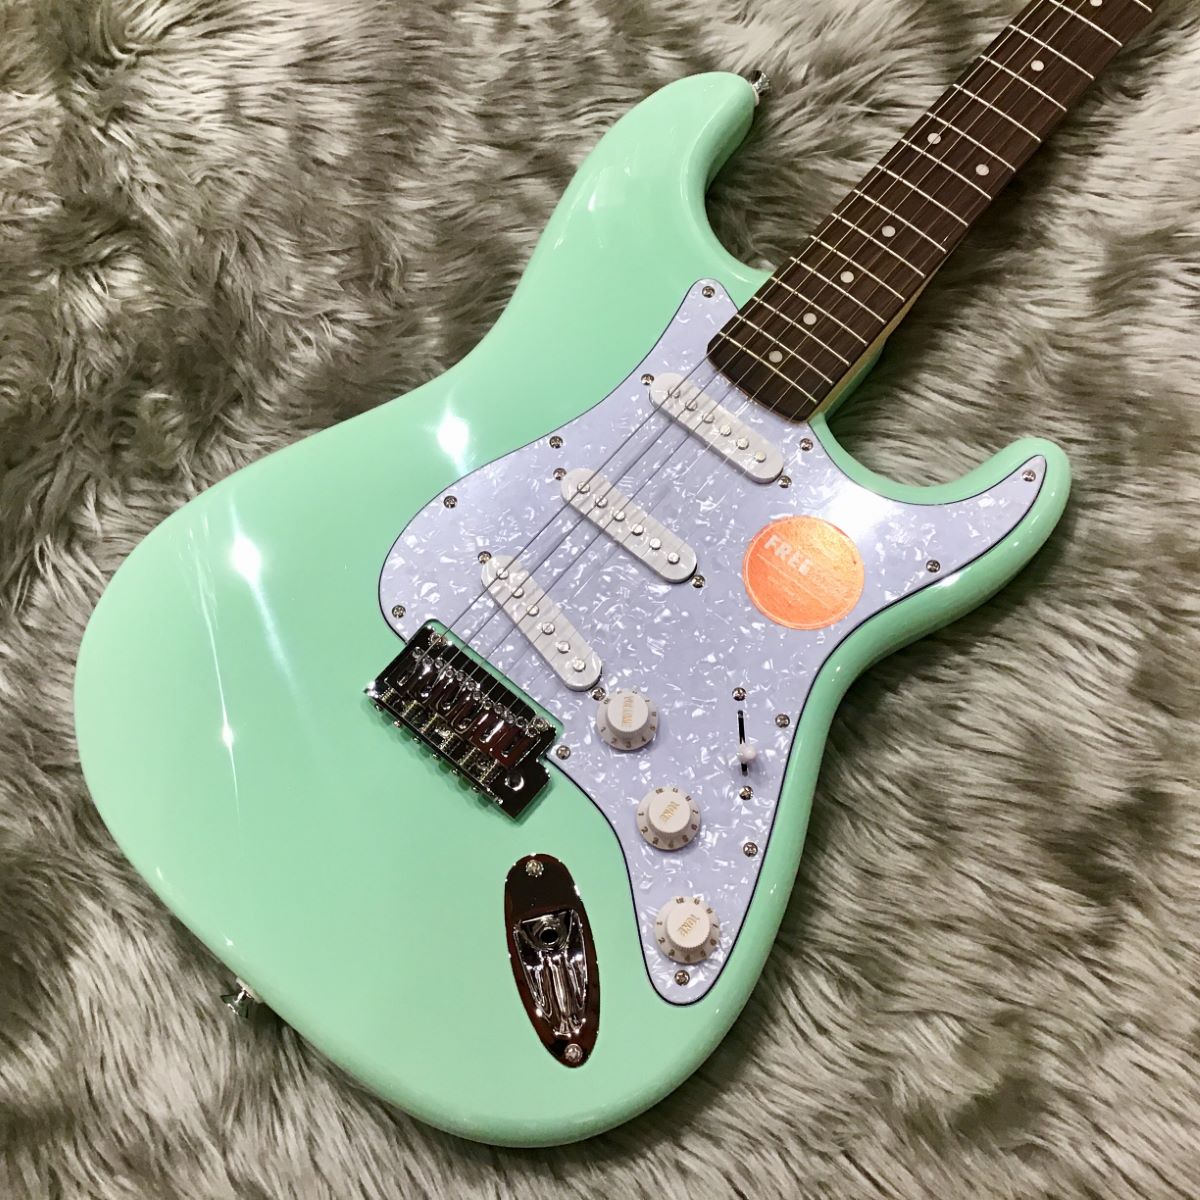 【6122】 Squier Stratocaster スクワイヤー 緑 グリーン